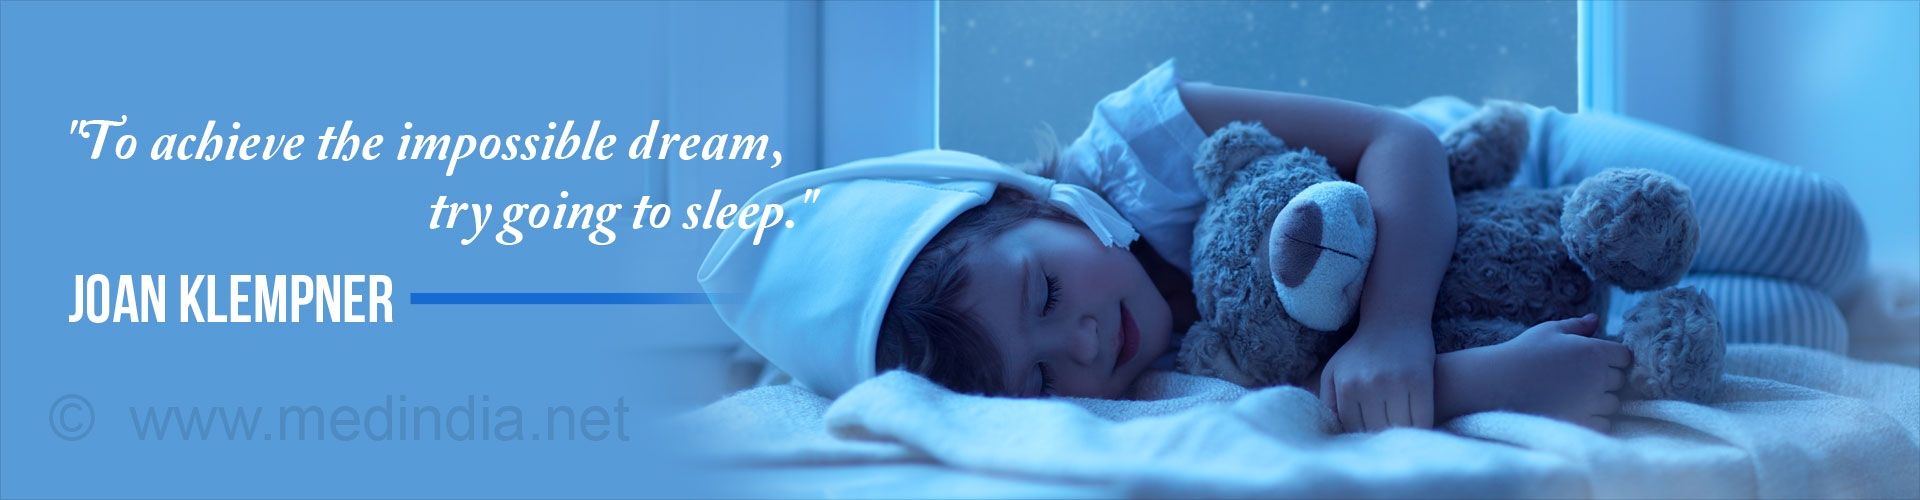 To achieve the impossible dream, try going to sleep.